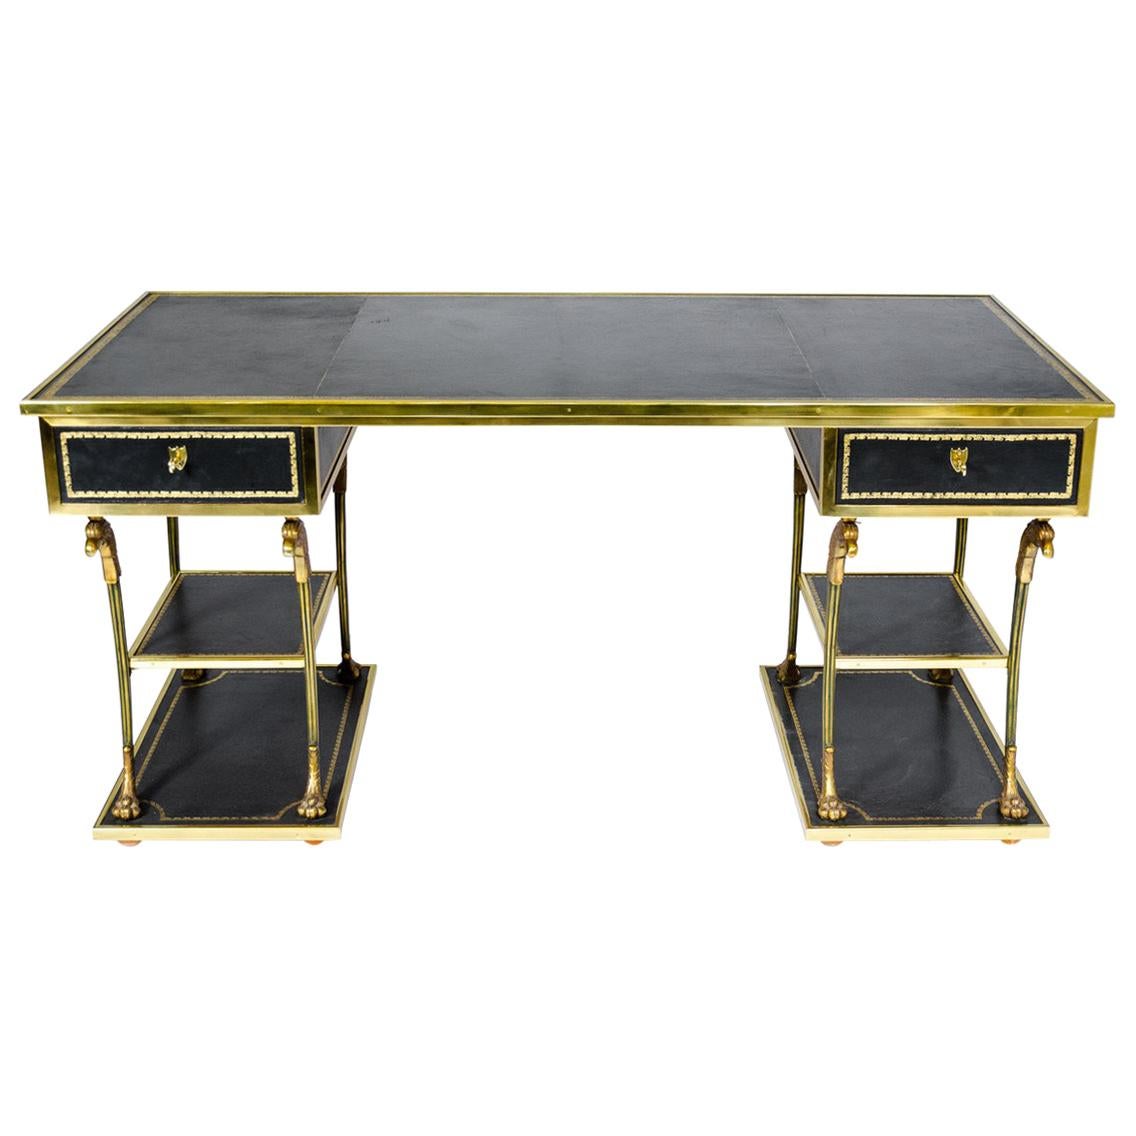 One of a Kind Neoclassical Desk by Maison Ramsay